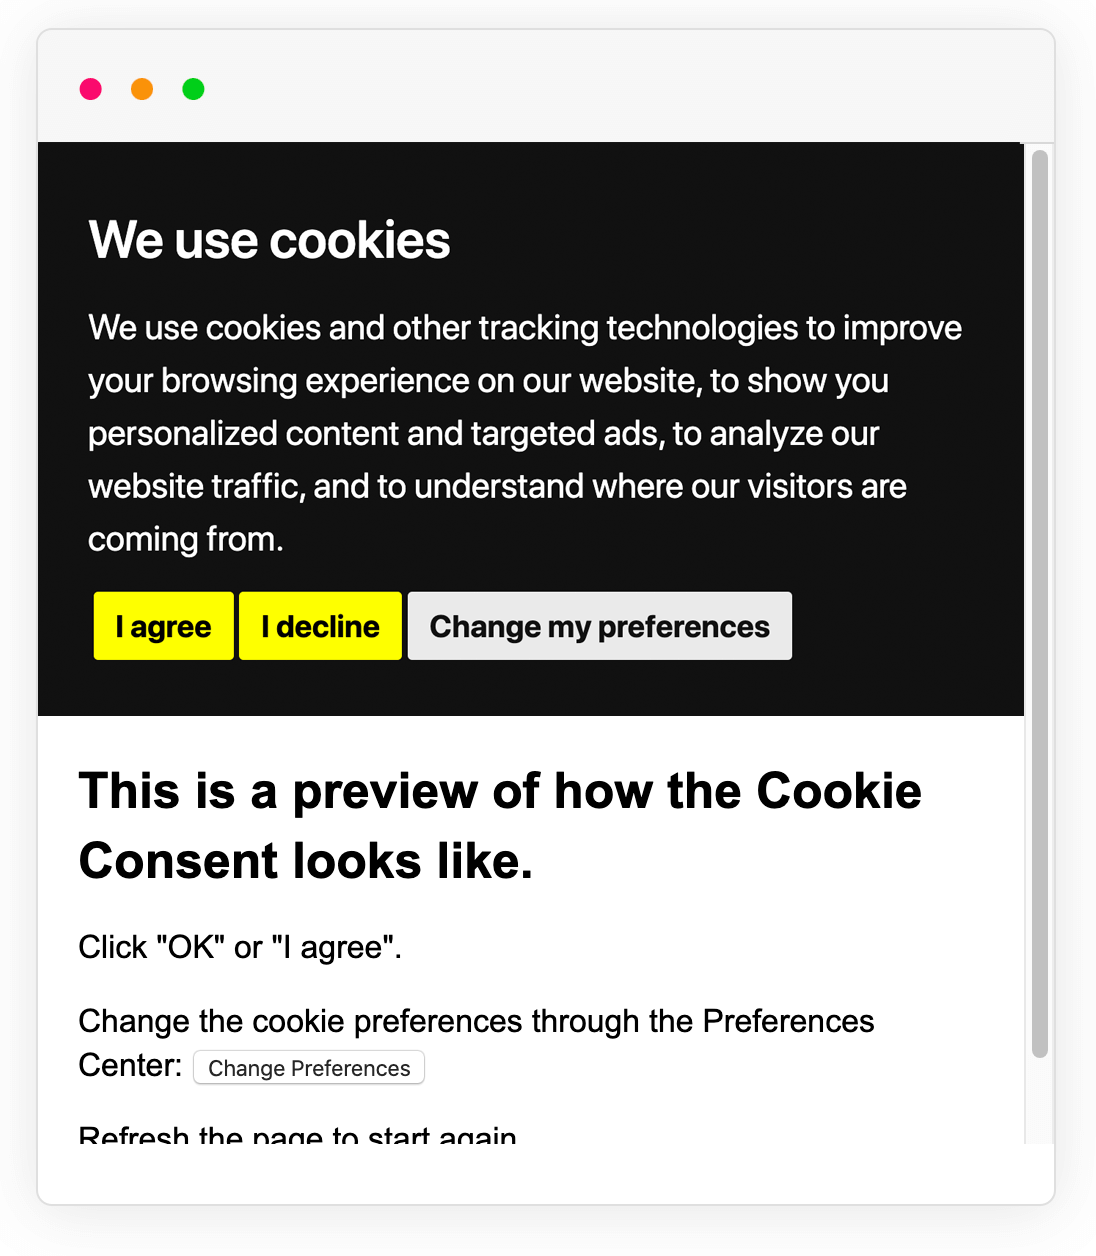 Example of Cookie Consent with GDPR consent preference